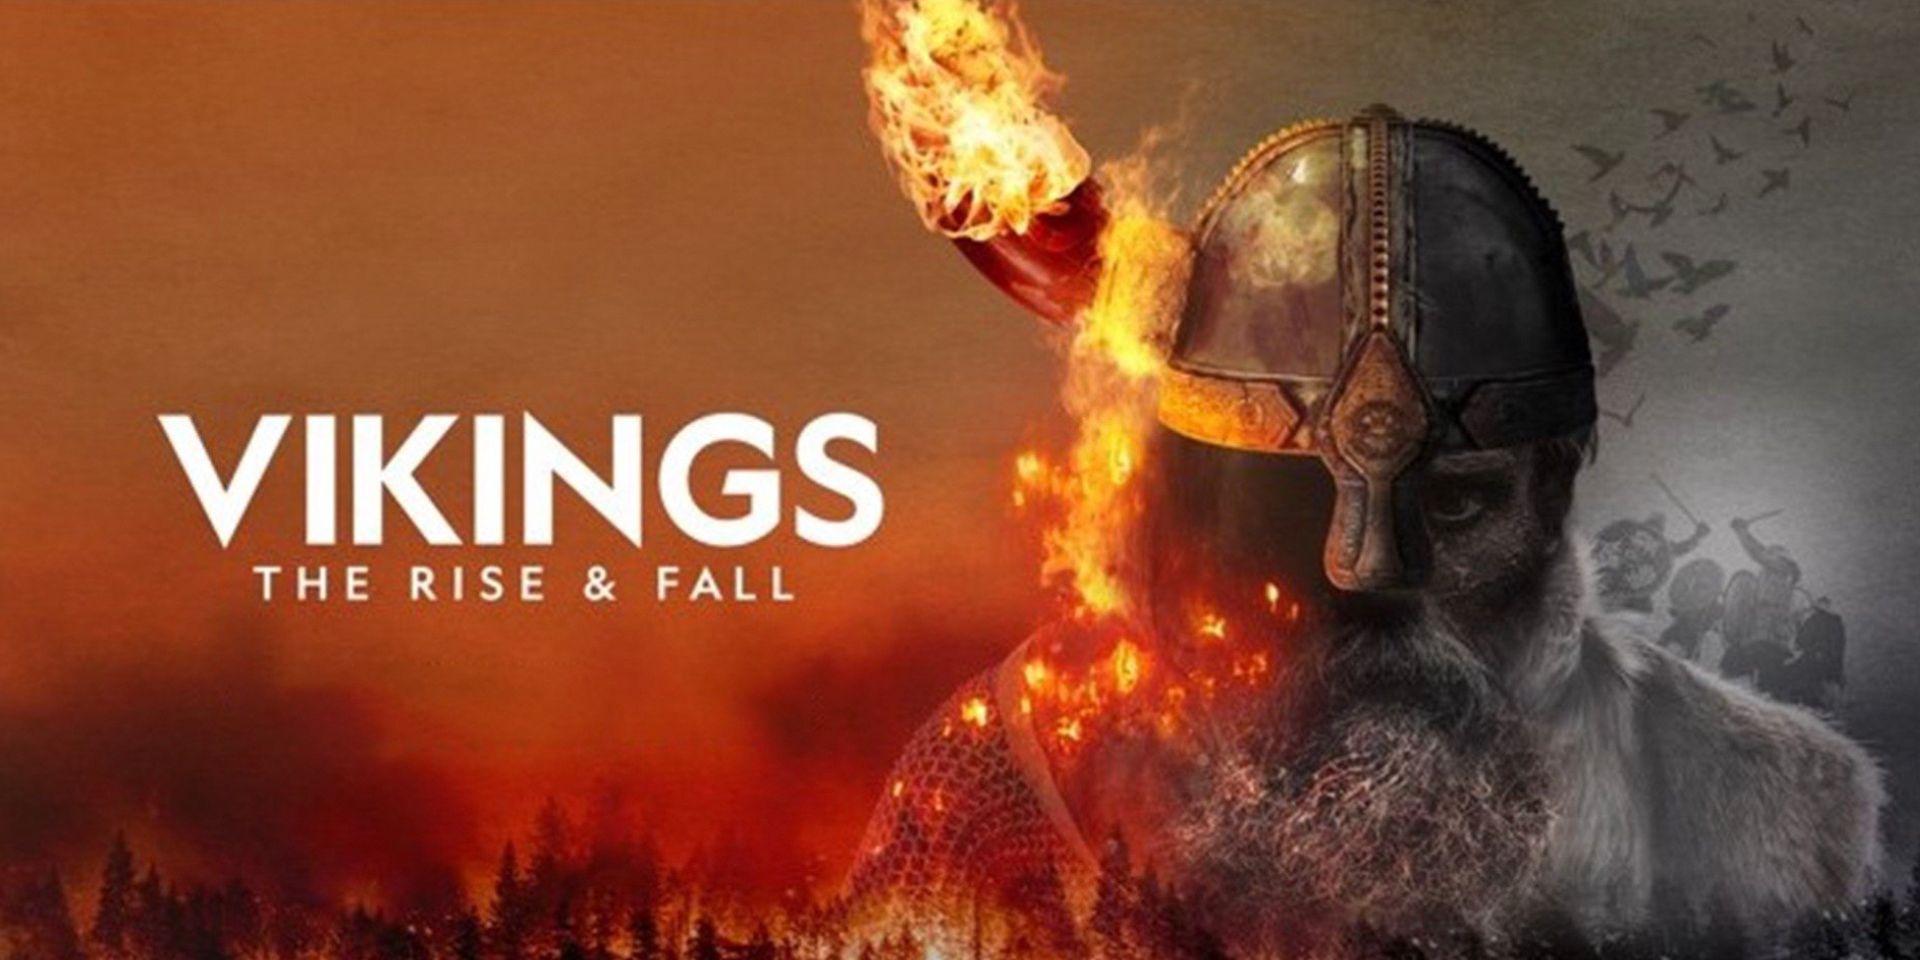 The title card for Vikings The Rise And Fall includes the text and a Viking with a helmet on fire